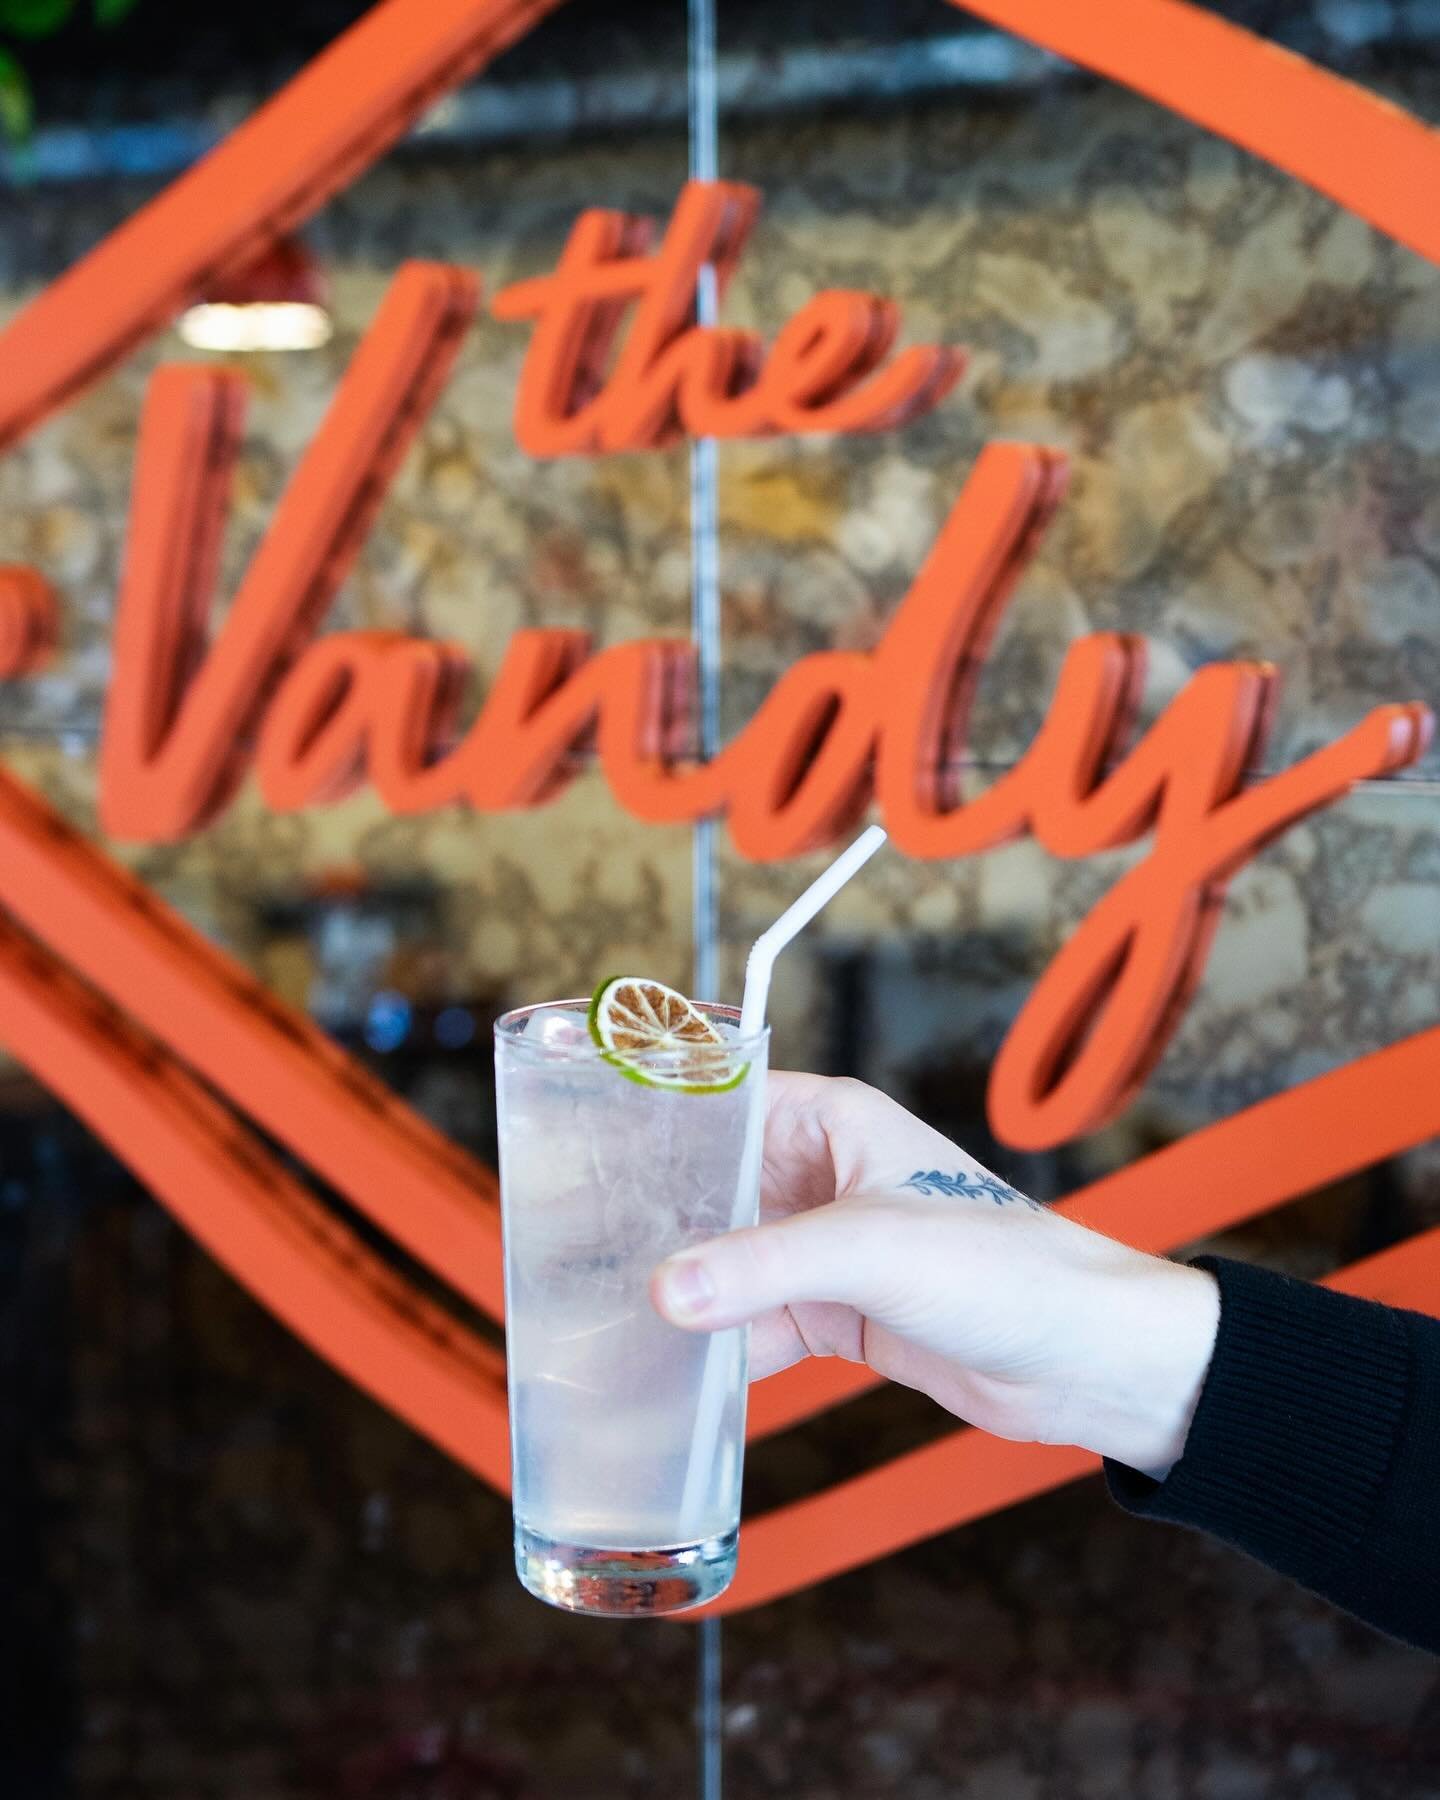 ATTN‼️ It&rsquo;s gonna be MAY(4th) at @thevandystl! The much-anticipated Down + Derby has a location change, + we can&rsquo;t wait to see your finest derby attire at @thevandystl to pair with our mint juleps. But, for the record, horse racing will s